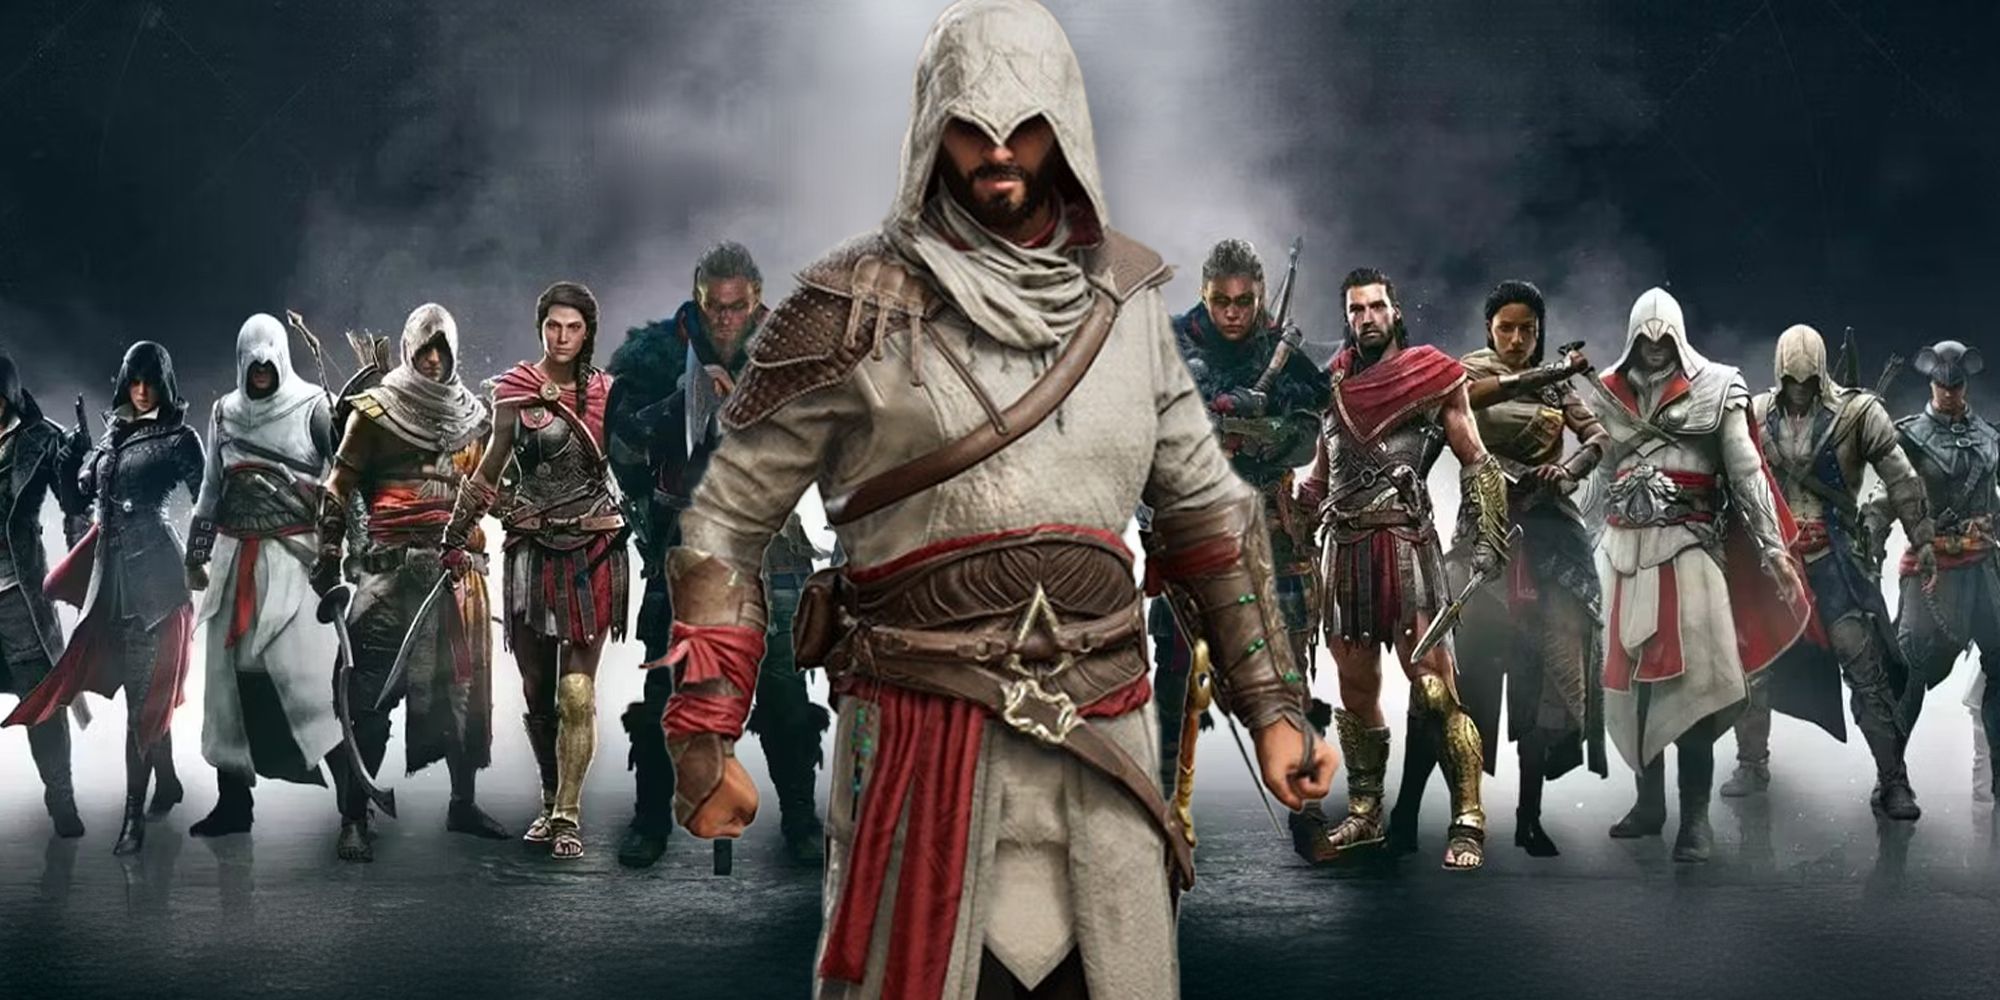 Basim from Assassin's Creed Mirage with other Assassins behind him